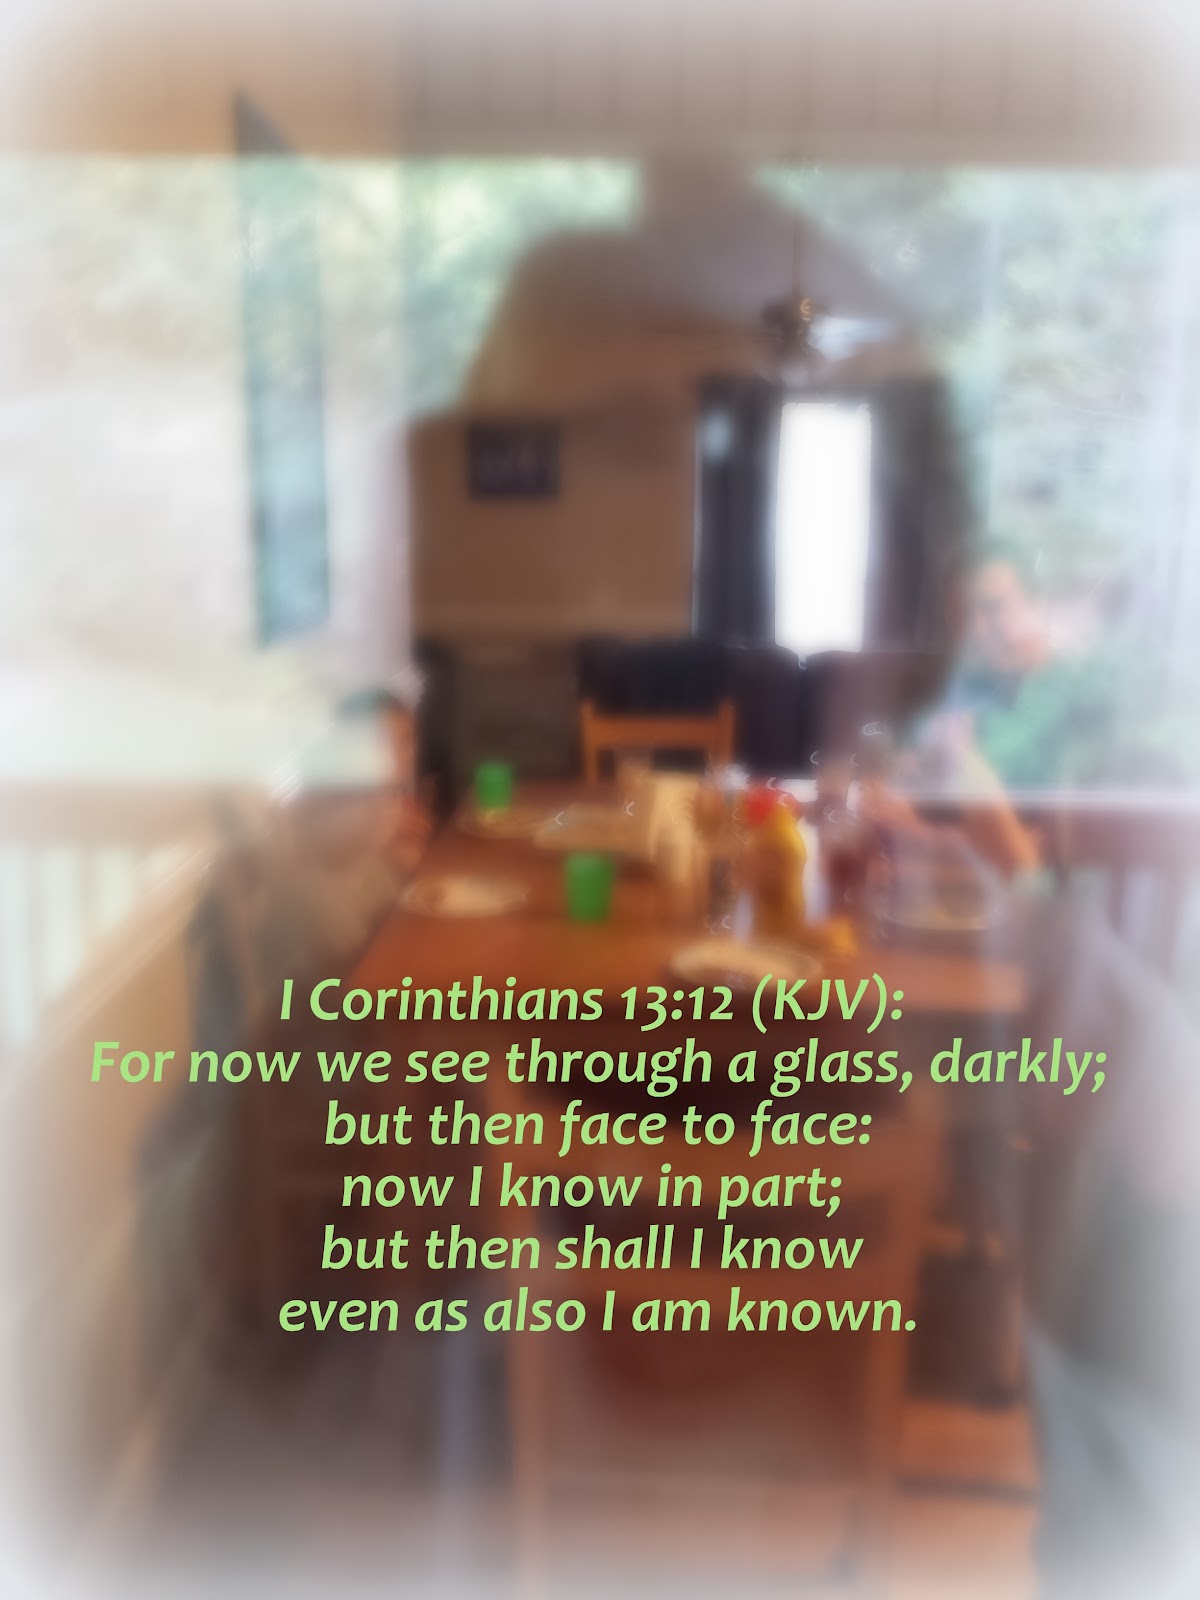 I Corinthians 13 12 (KJV) says For now we see through a glass, darkly  but then face to face  now I know in part but then shall I know even as also I am known.  9-14-17.jpg